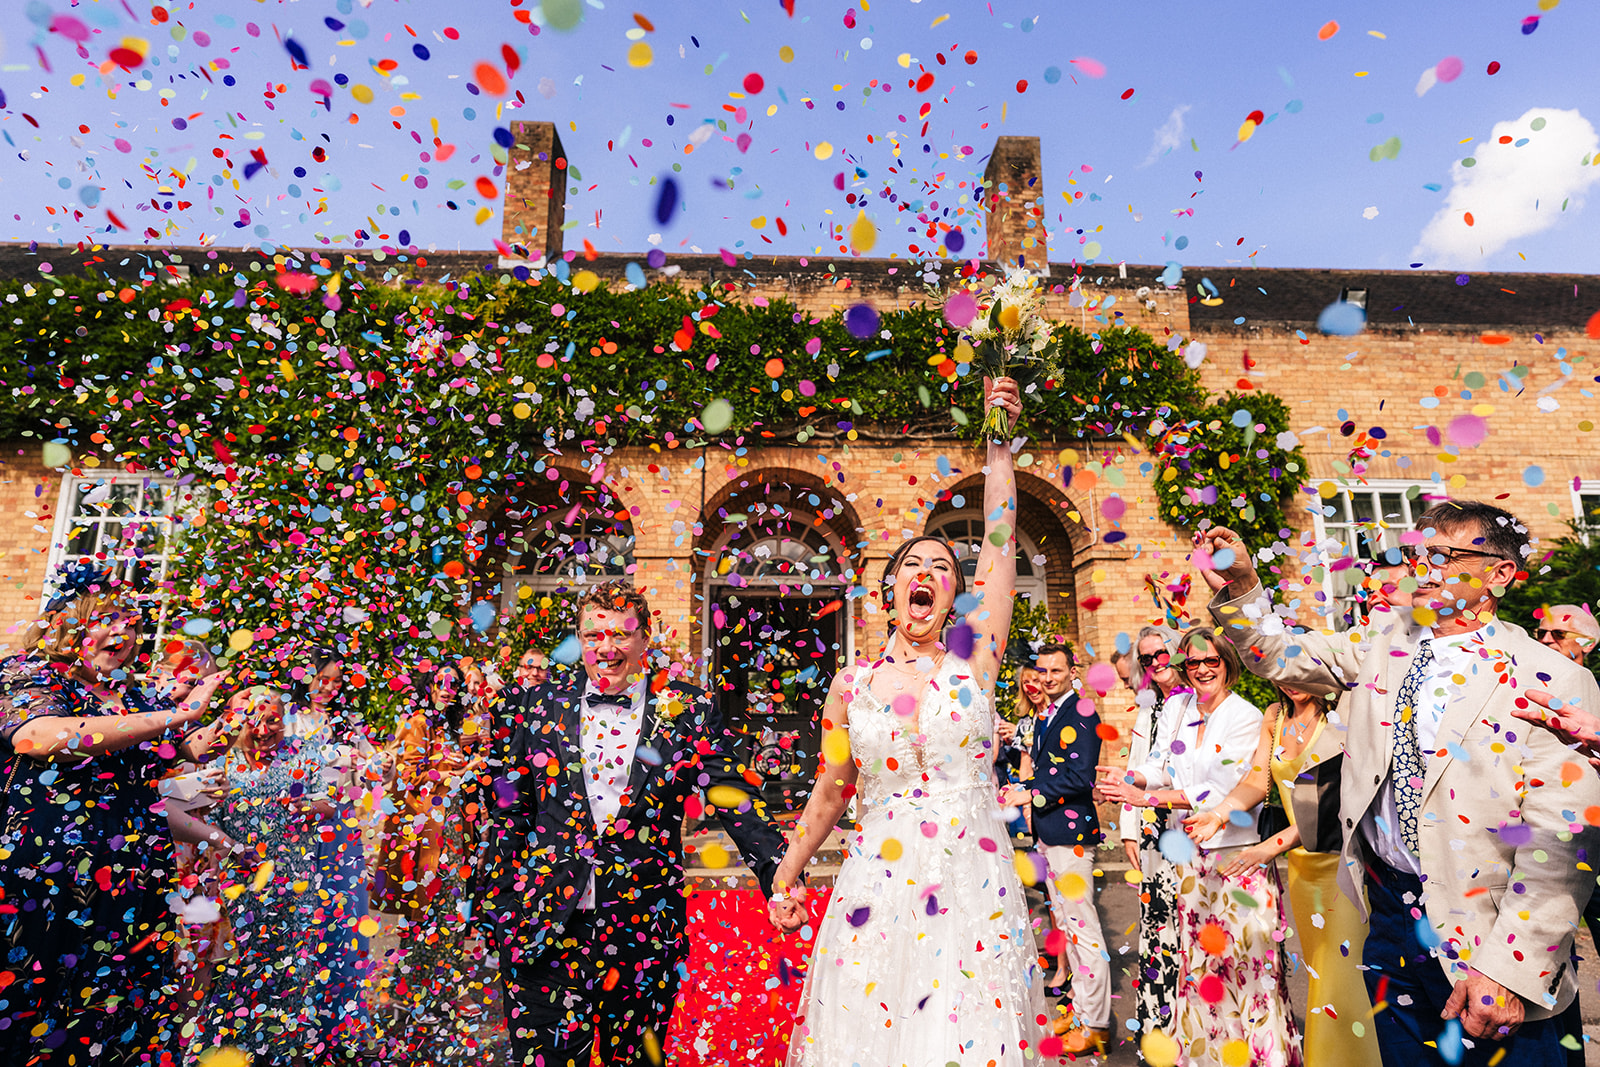 Hemswell Court Wedding Photography - bride and groom getting covered in confetti after their wedding ceremony